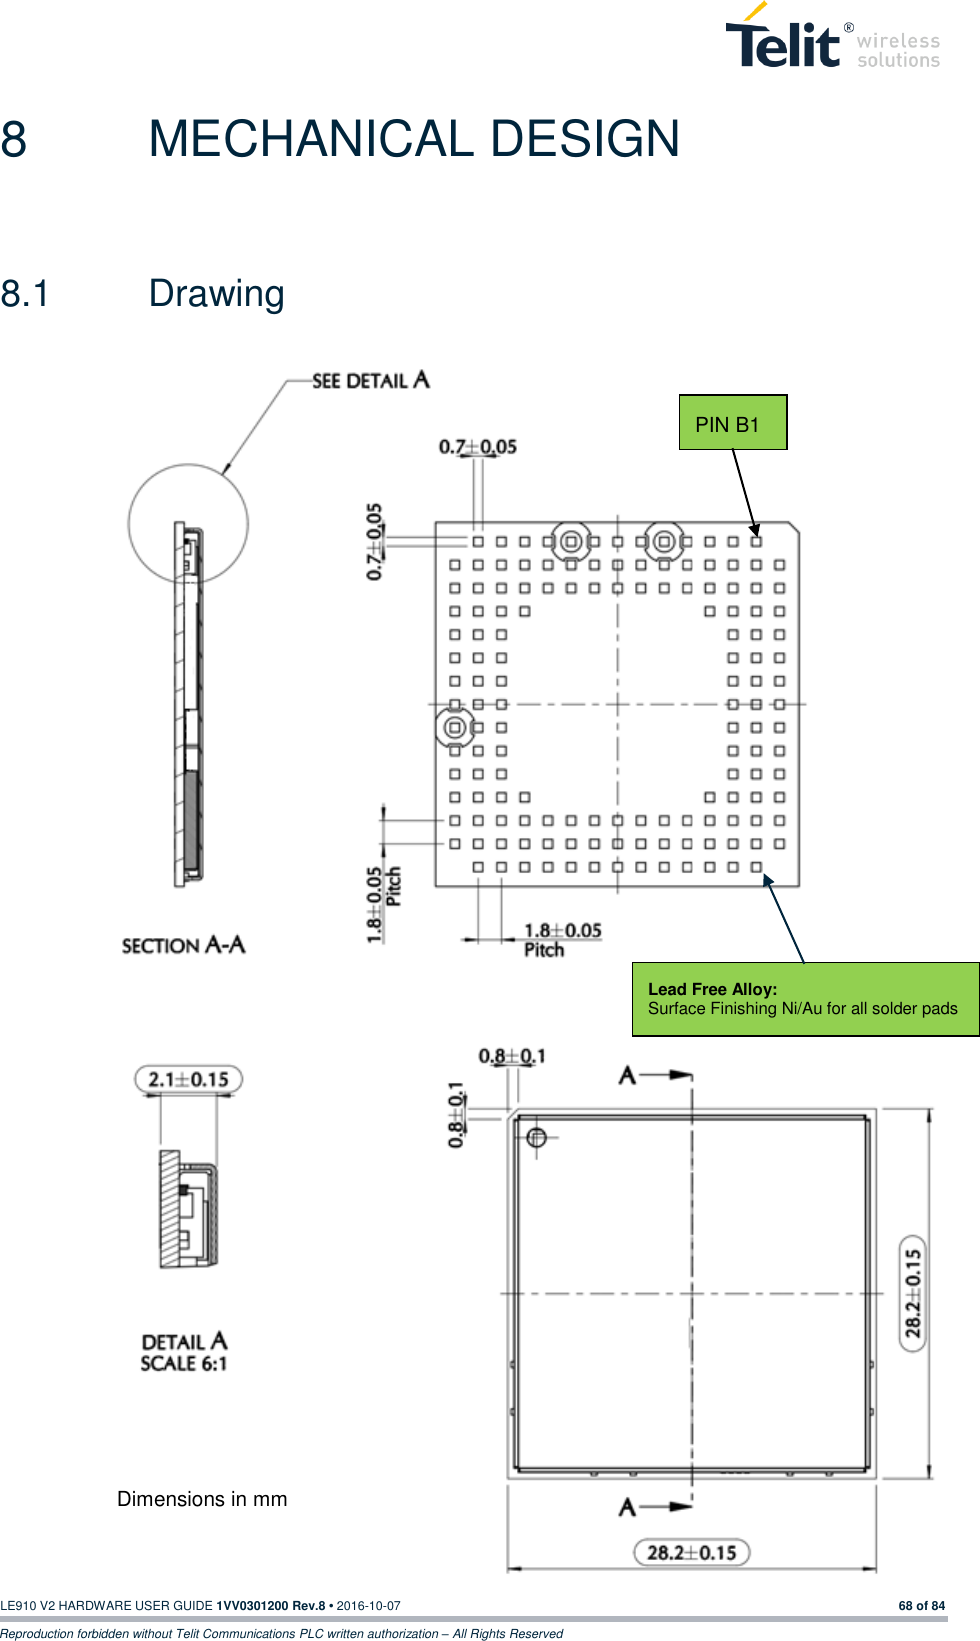   LE910 V2 HARDWARE USER GUIDE 1VV0301200 Rev.8 • 2016-10-07 68 of 84 Reproduction forbidden without Telit Communications PLC written authorization – All Rights Reserved 8  MECHANICAL DESIGN 8.1  Drawing  Dimensions in mm PIN B1 Lead Free Alloy: Surface Finishing Ni/Au for all solder pads 